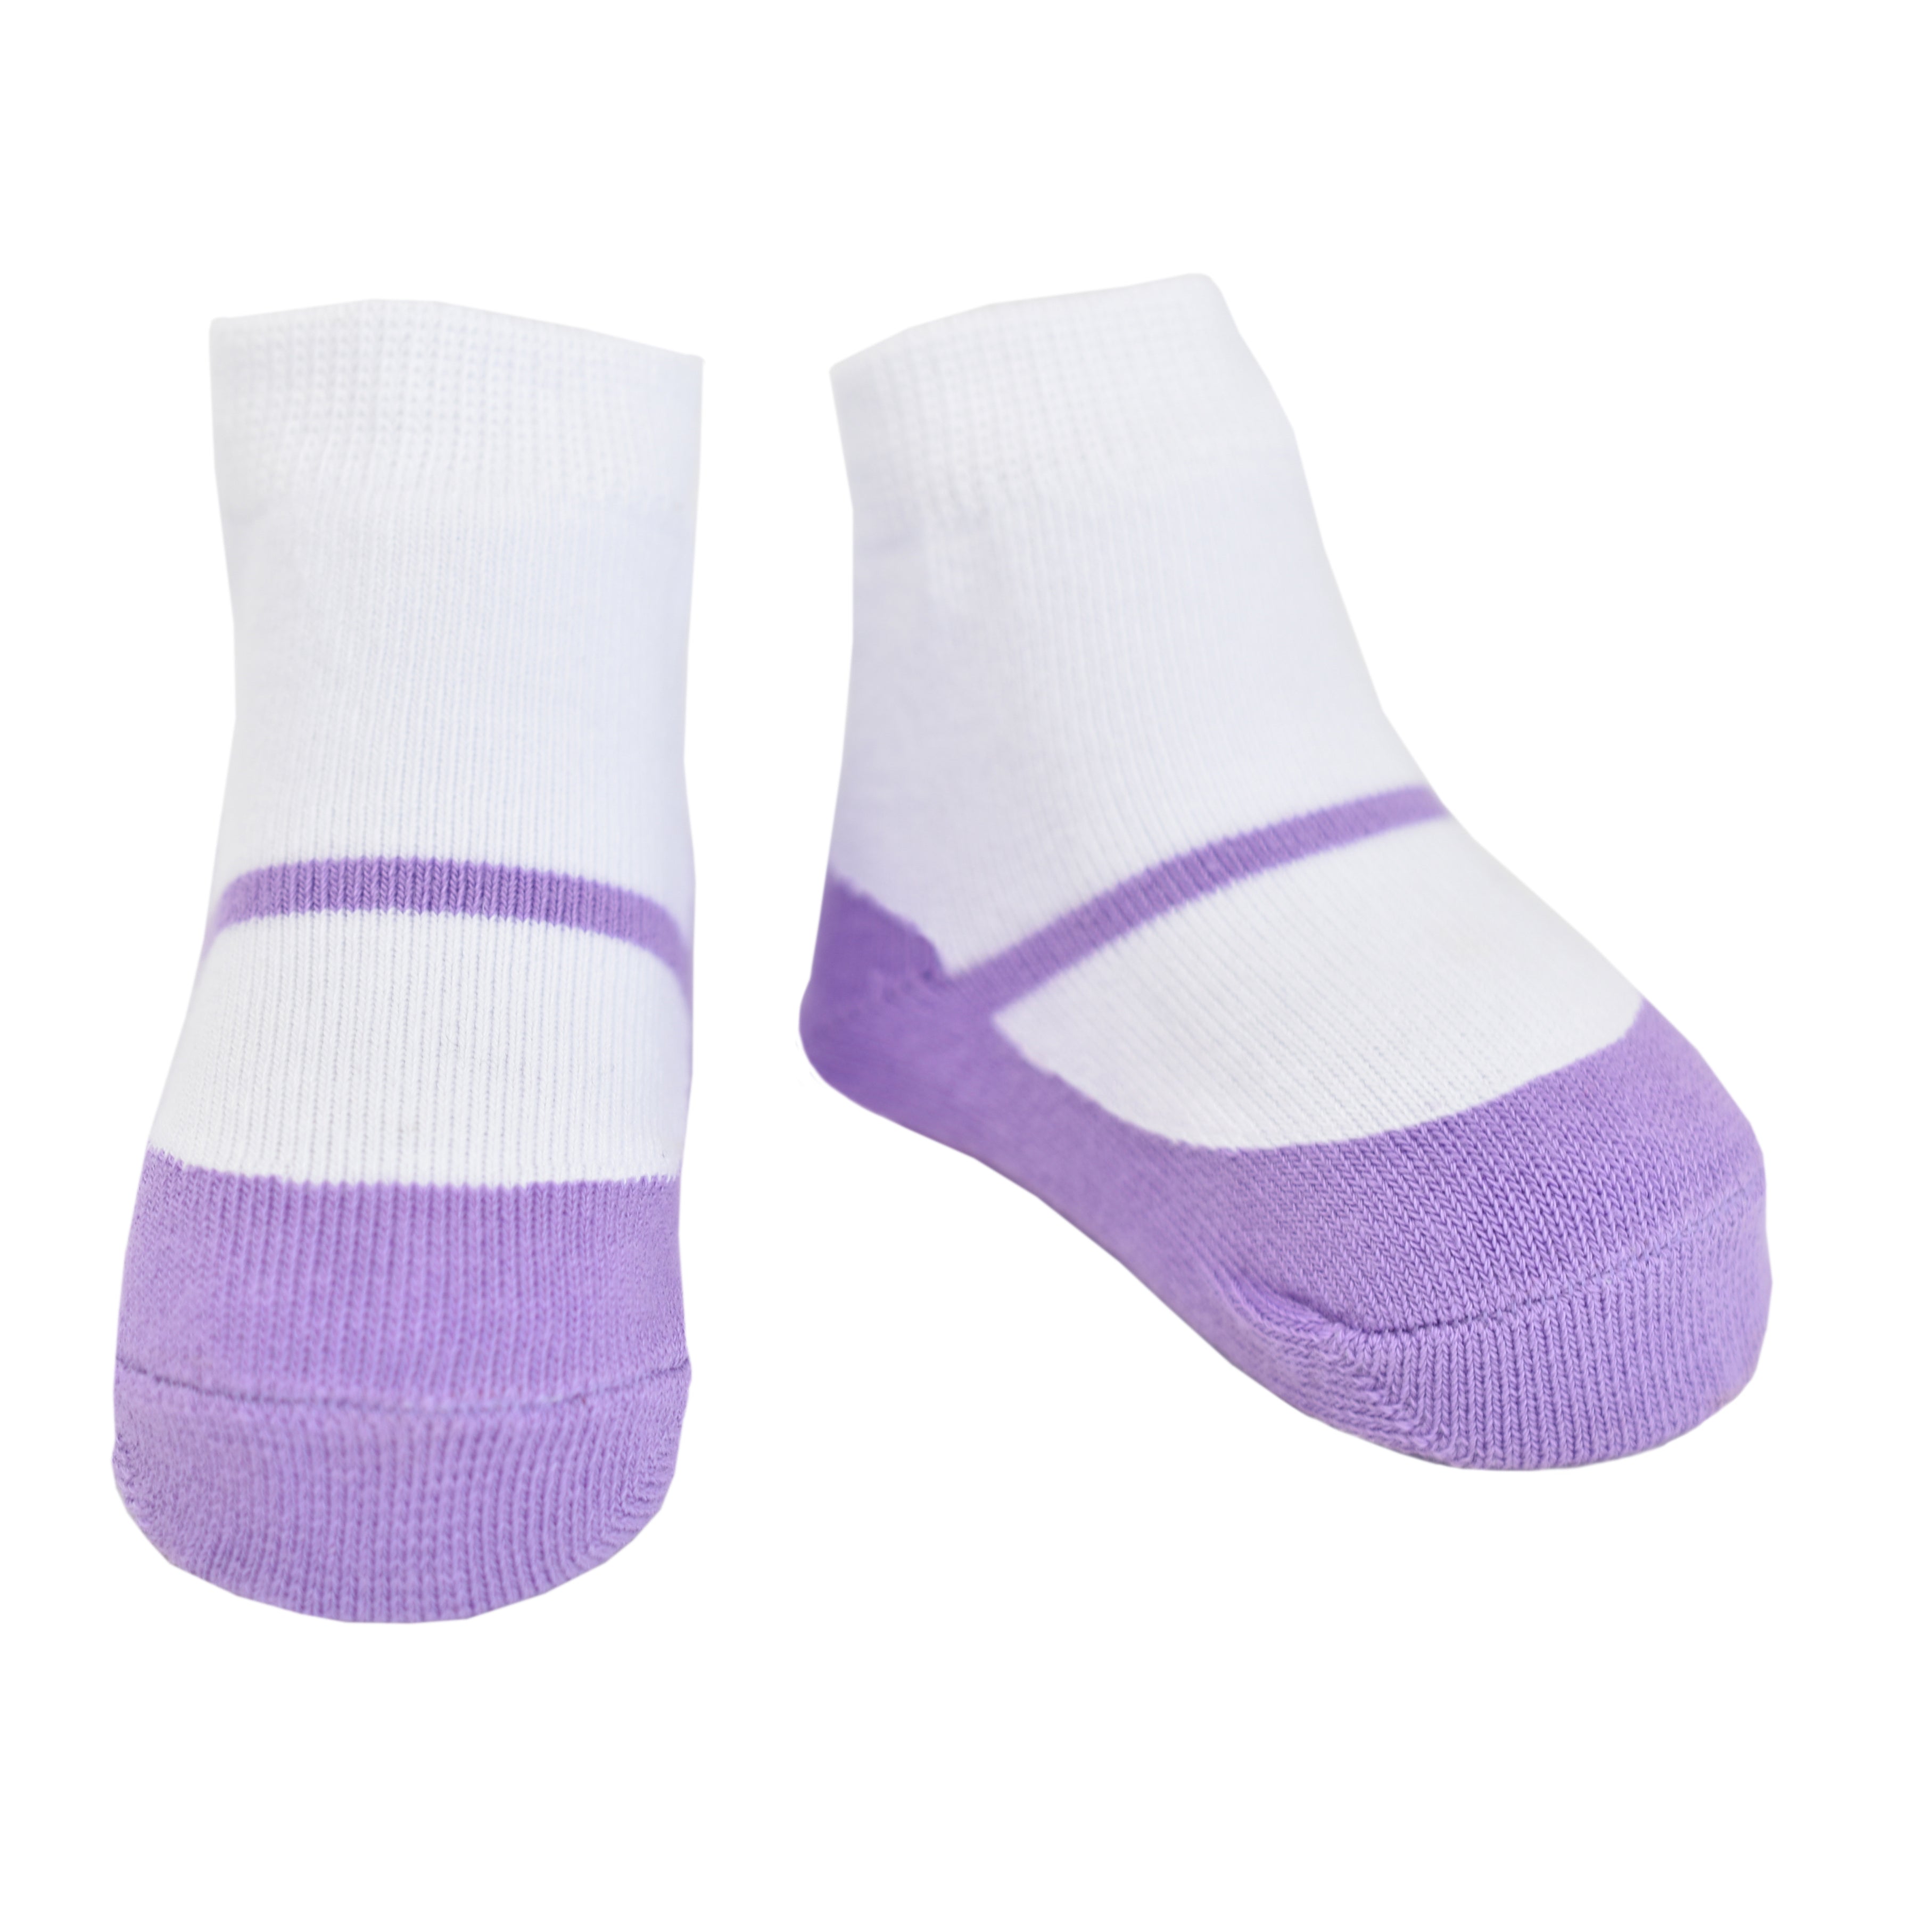 Lavender baby girl socks with non-slip gripper soles by Baby Emporio